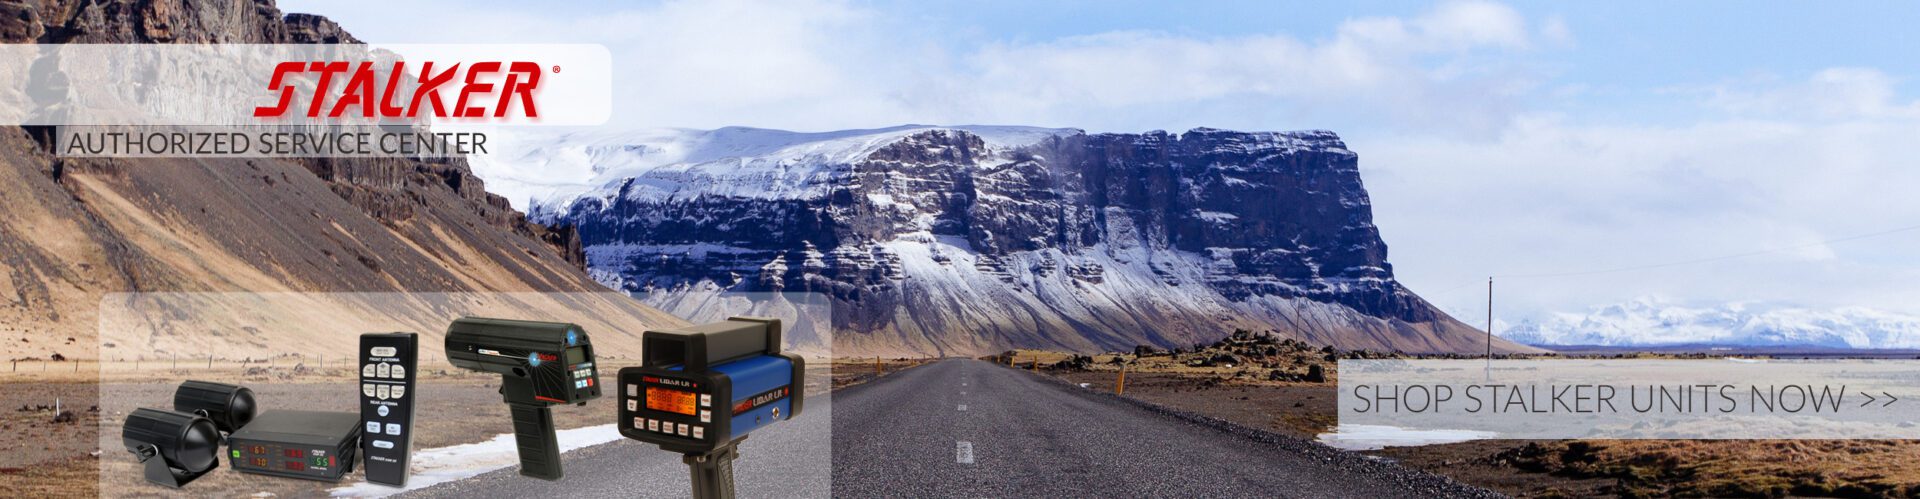 A road with mountains in the background and a blue suitcase on the side.